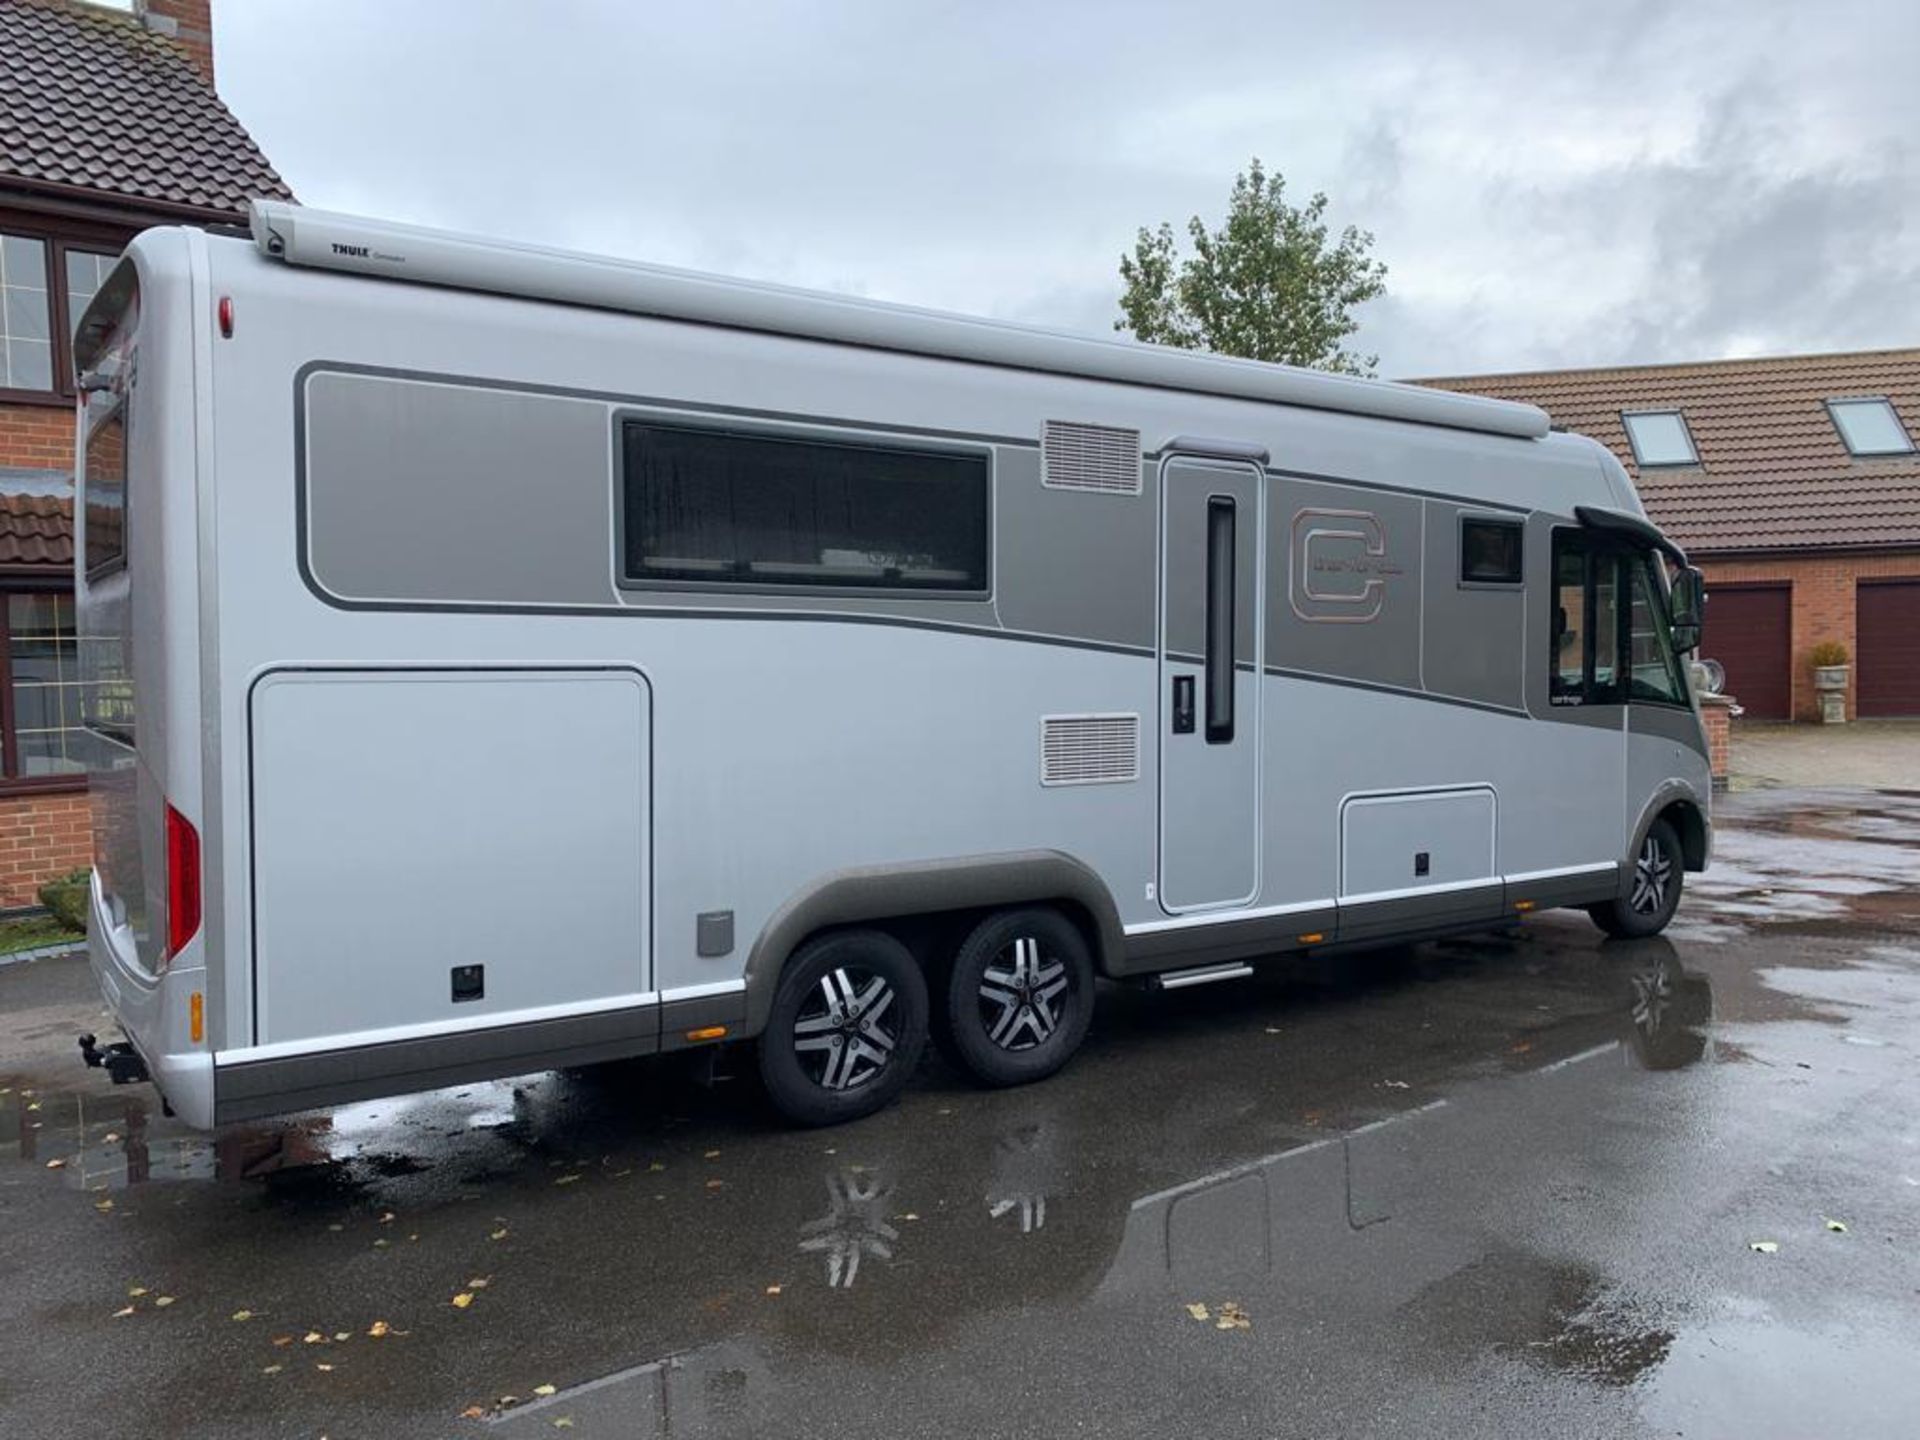 2020 CARTHAGO LINER-FOR-TWO 53L MOTORHOME 11 mths WARRANTY 4529 MILES, MINT CONDITION NO VAT - Image 5 of 38